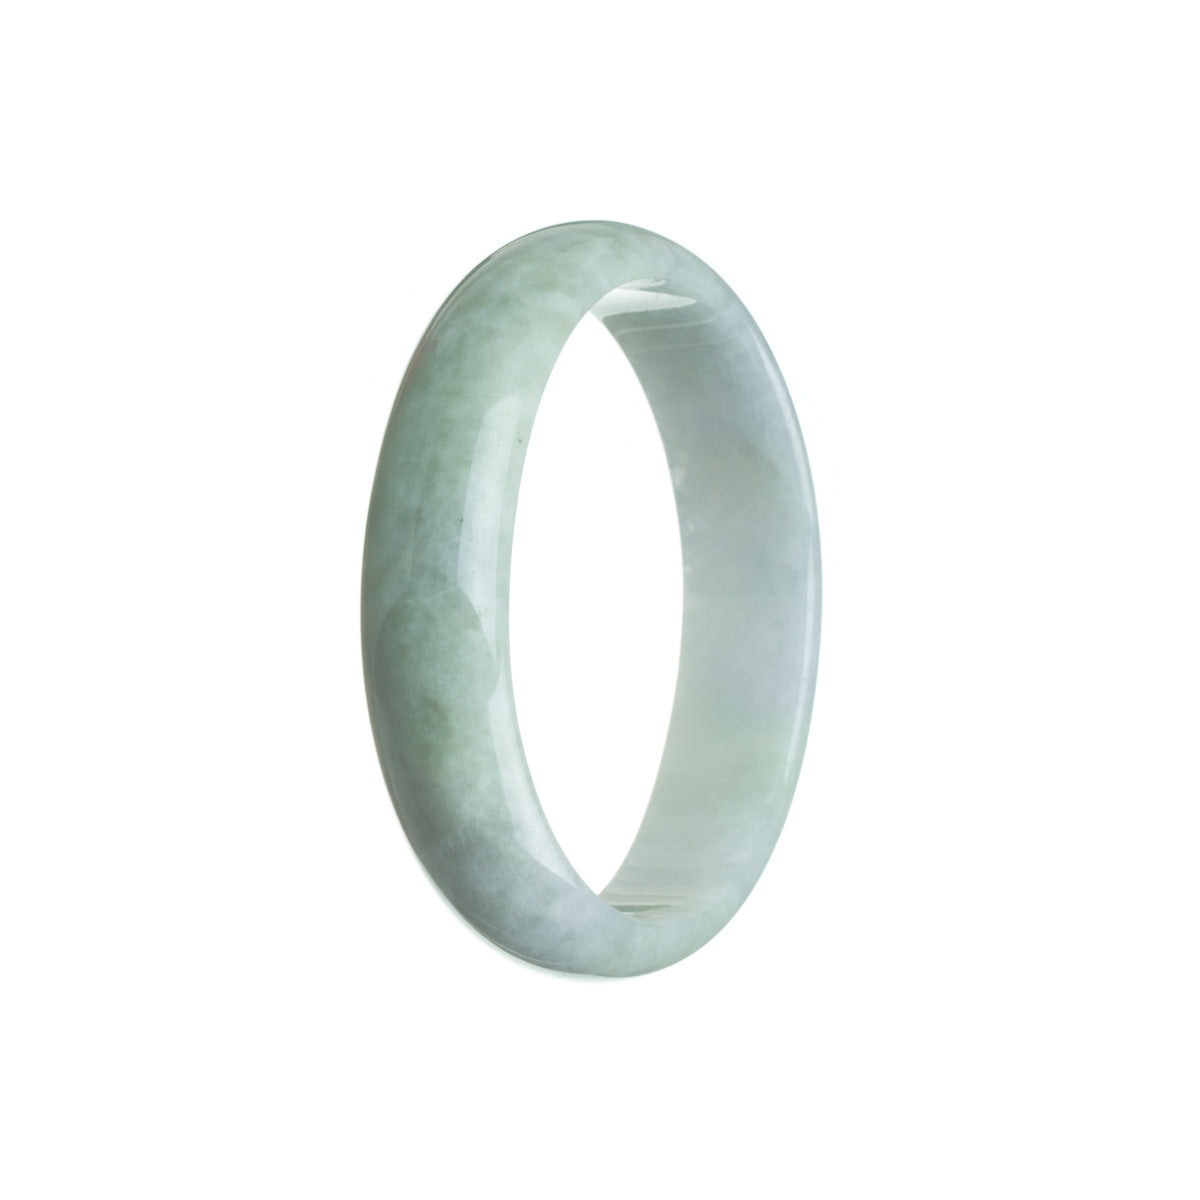 Real Grade A Pale green with a hint of Lavender Traditional Jade Bracelet - 57mm Oval